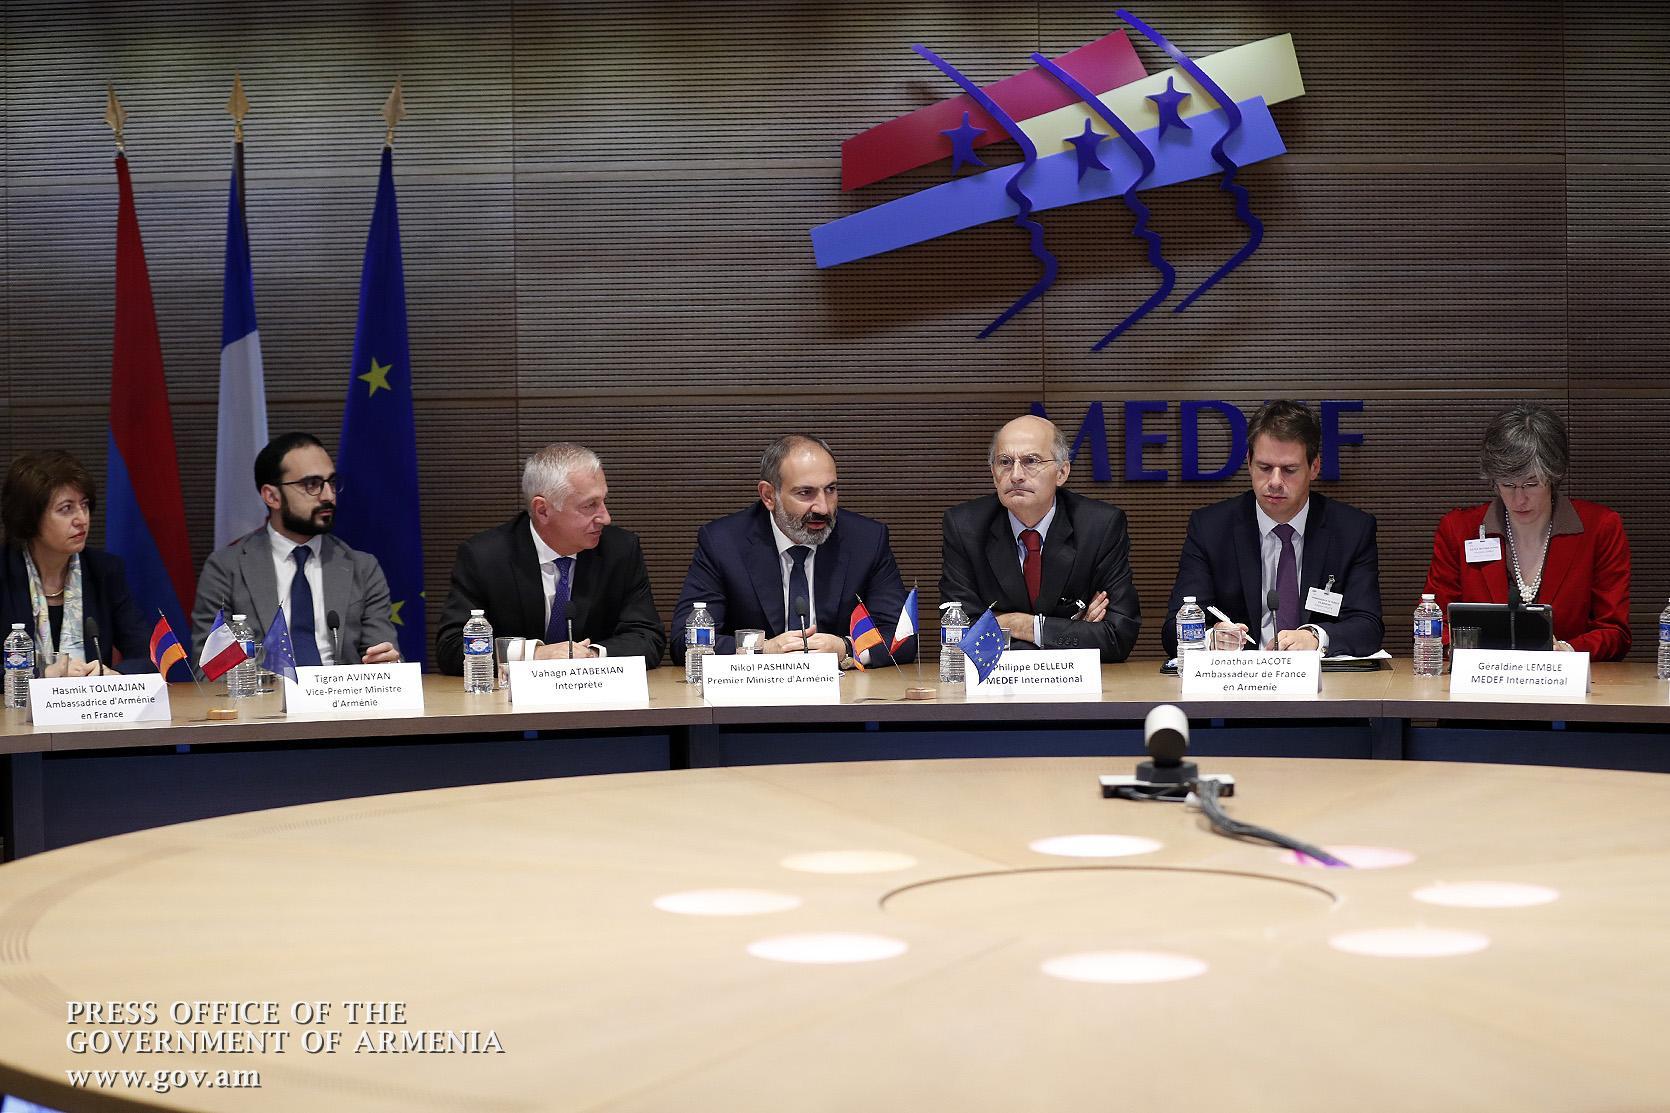 In France, Pashinyan Outlines Vision for Armenia’s Economy